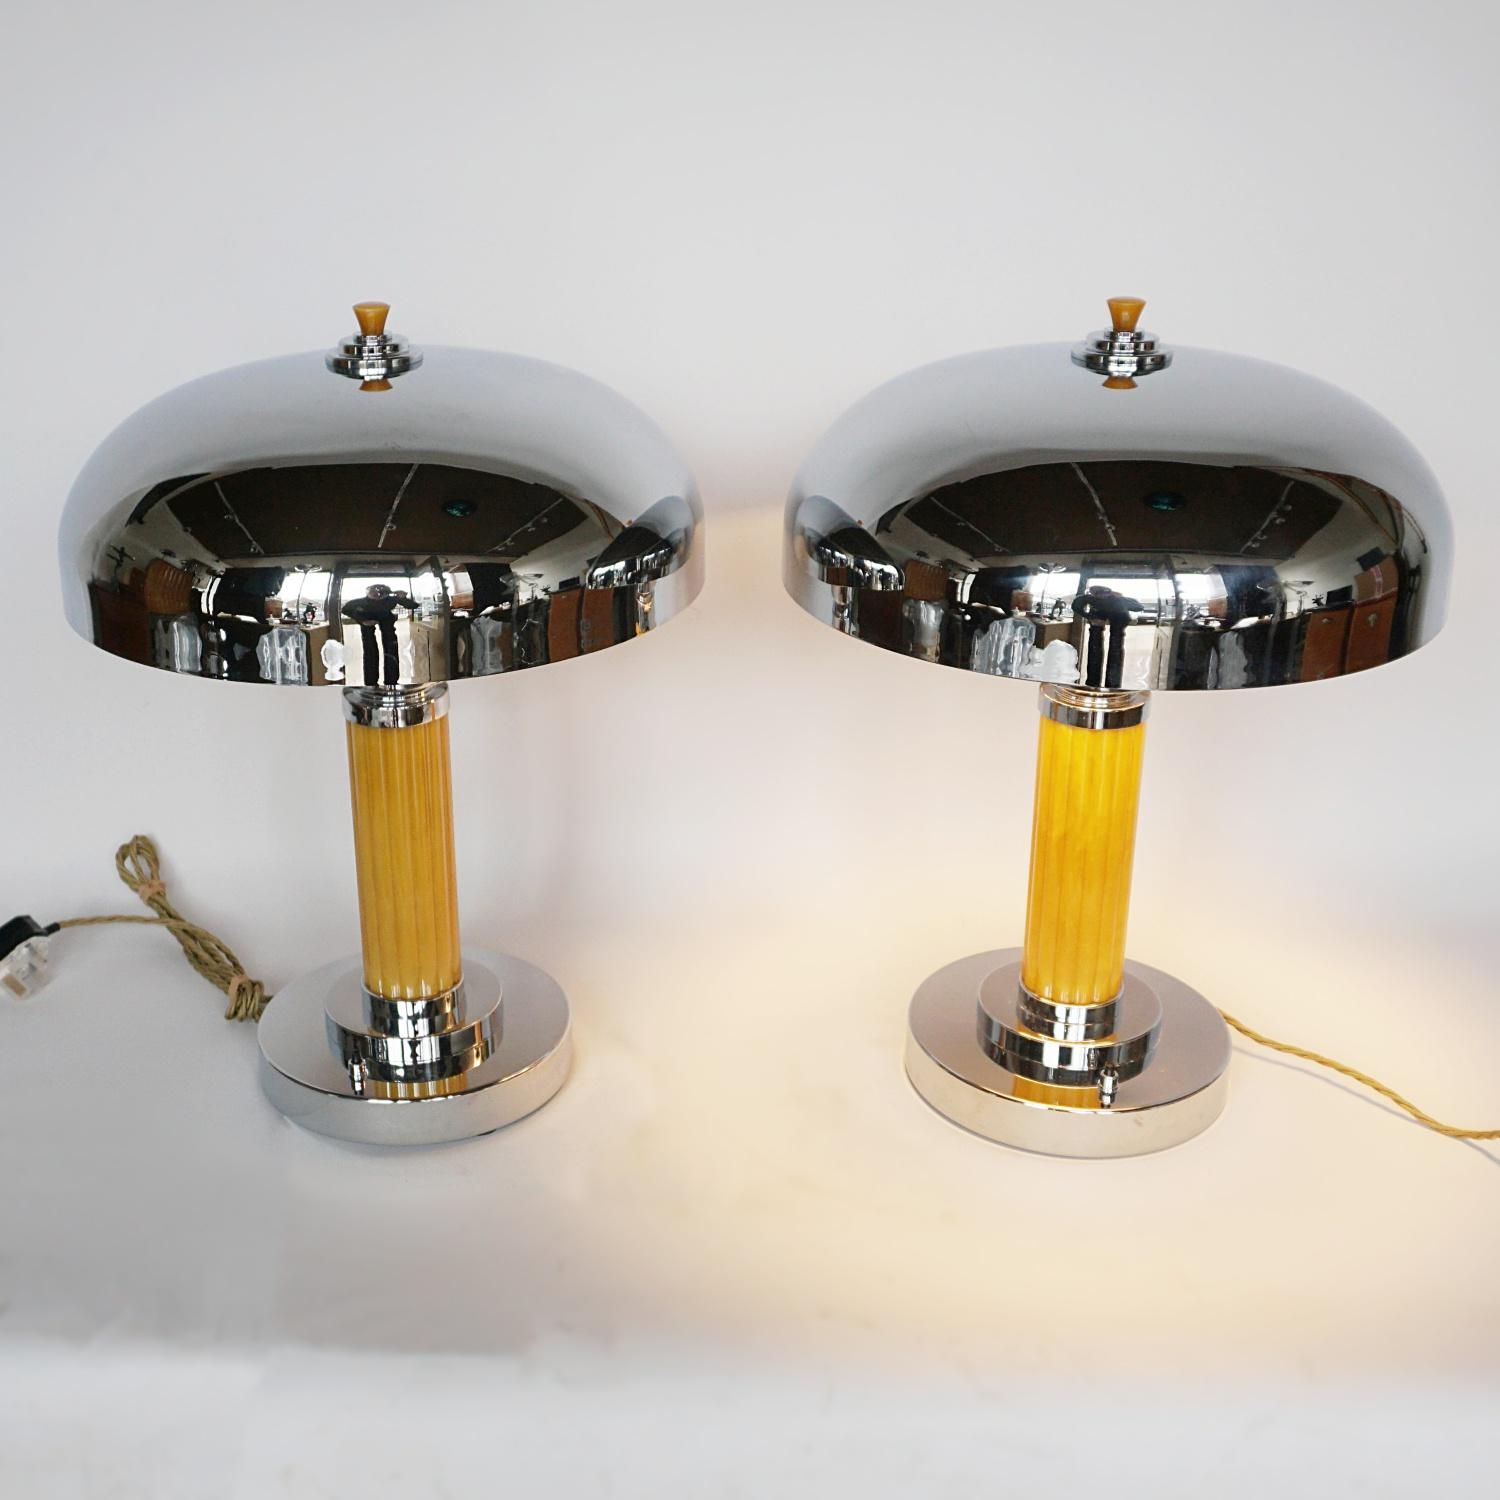 Vintage Art Deco Dome Lamps Bakelite & Chromed Metal  In Good Condition For Sale In Forest Row, East Sussex